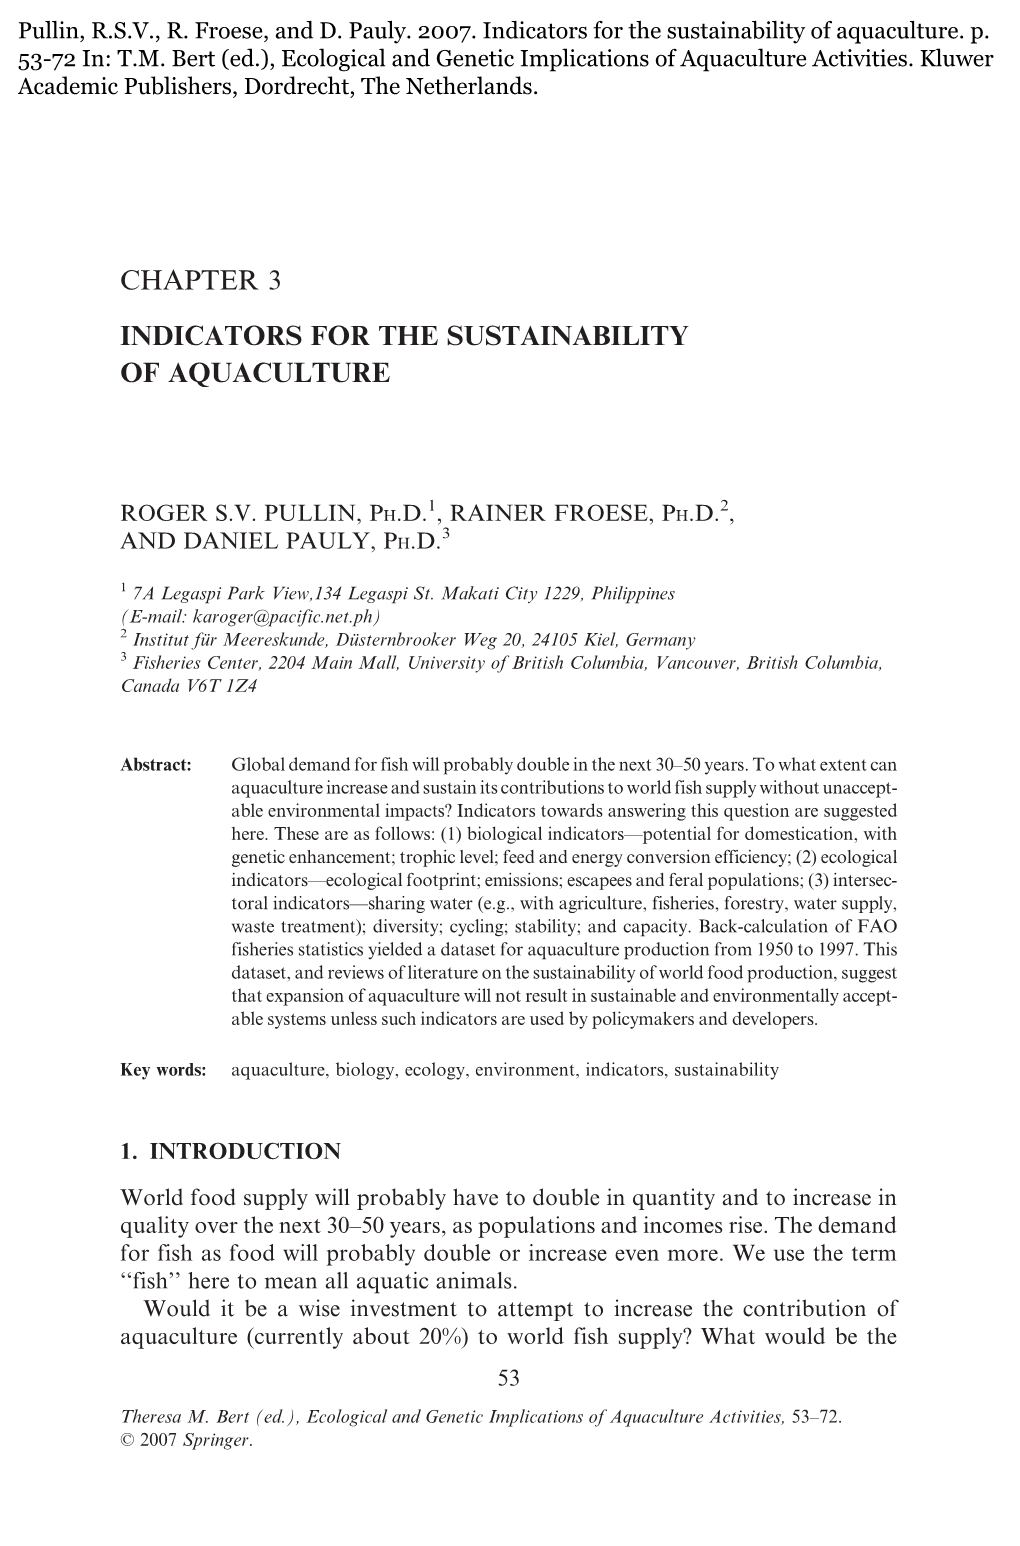 Chapter 3 Indicators for the Sustainability of Aquaculture